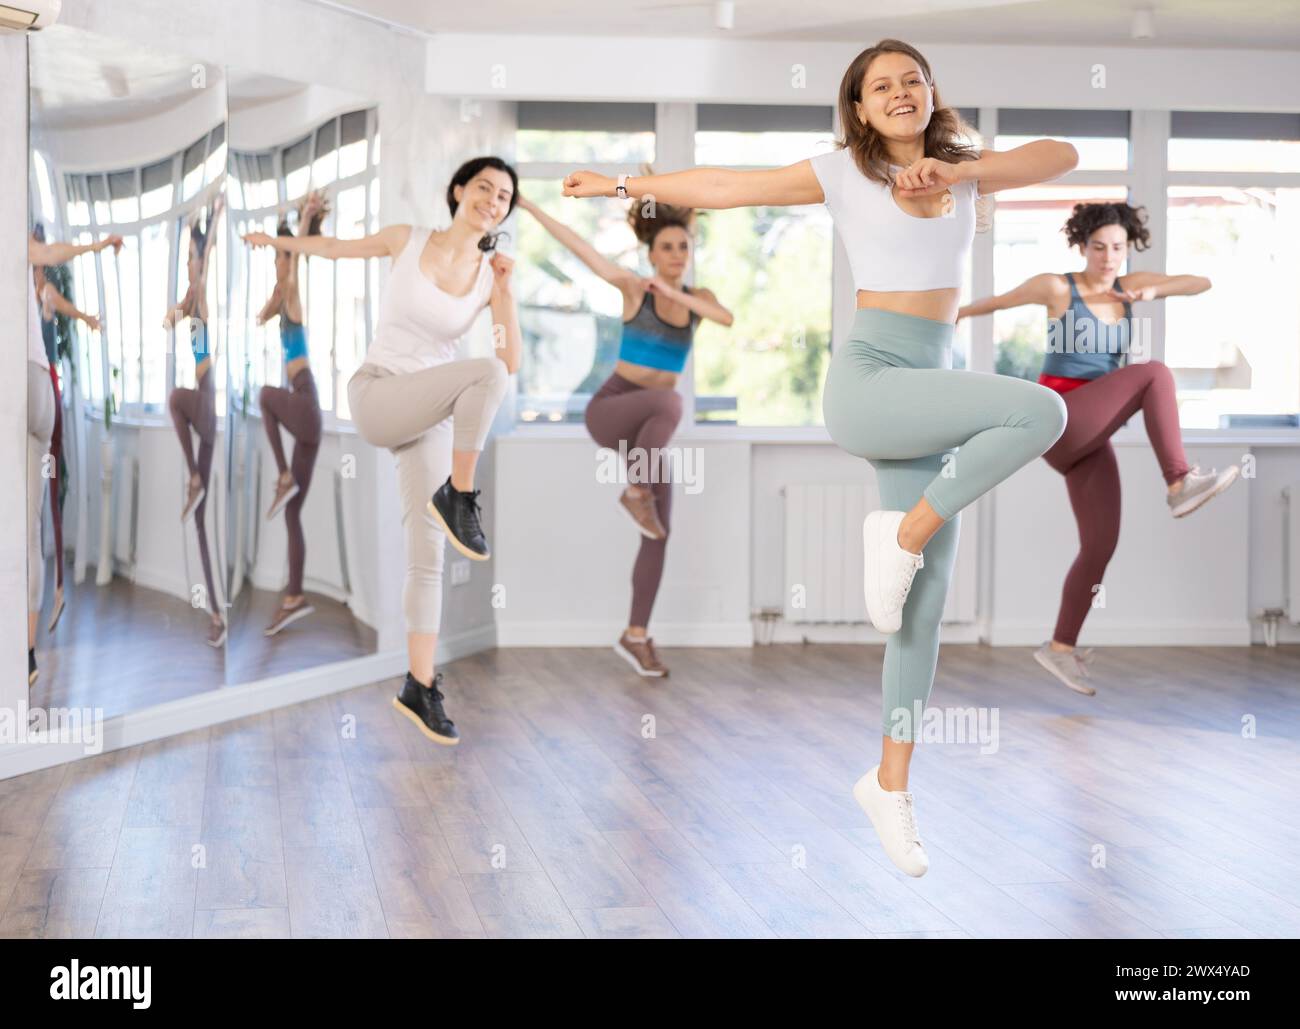 Cheerful girl captured jumping during lively dance fitness routine Stock Photo